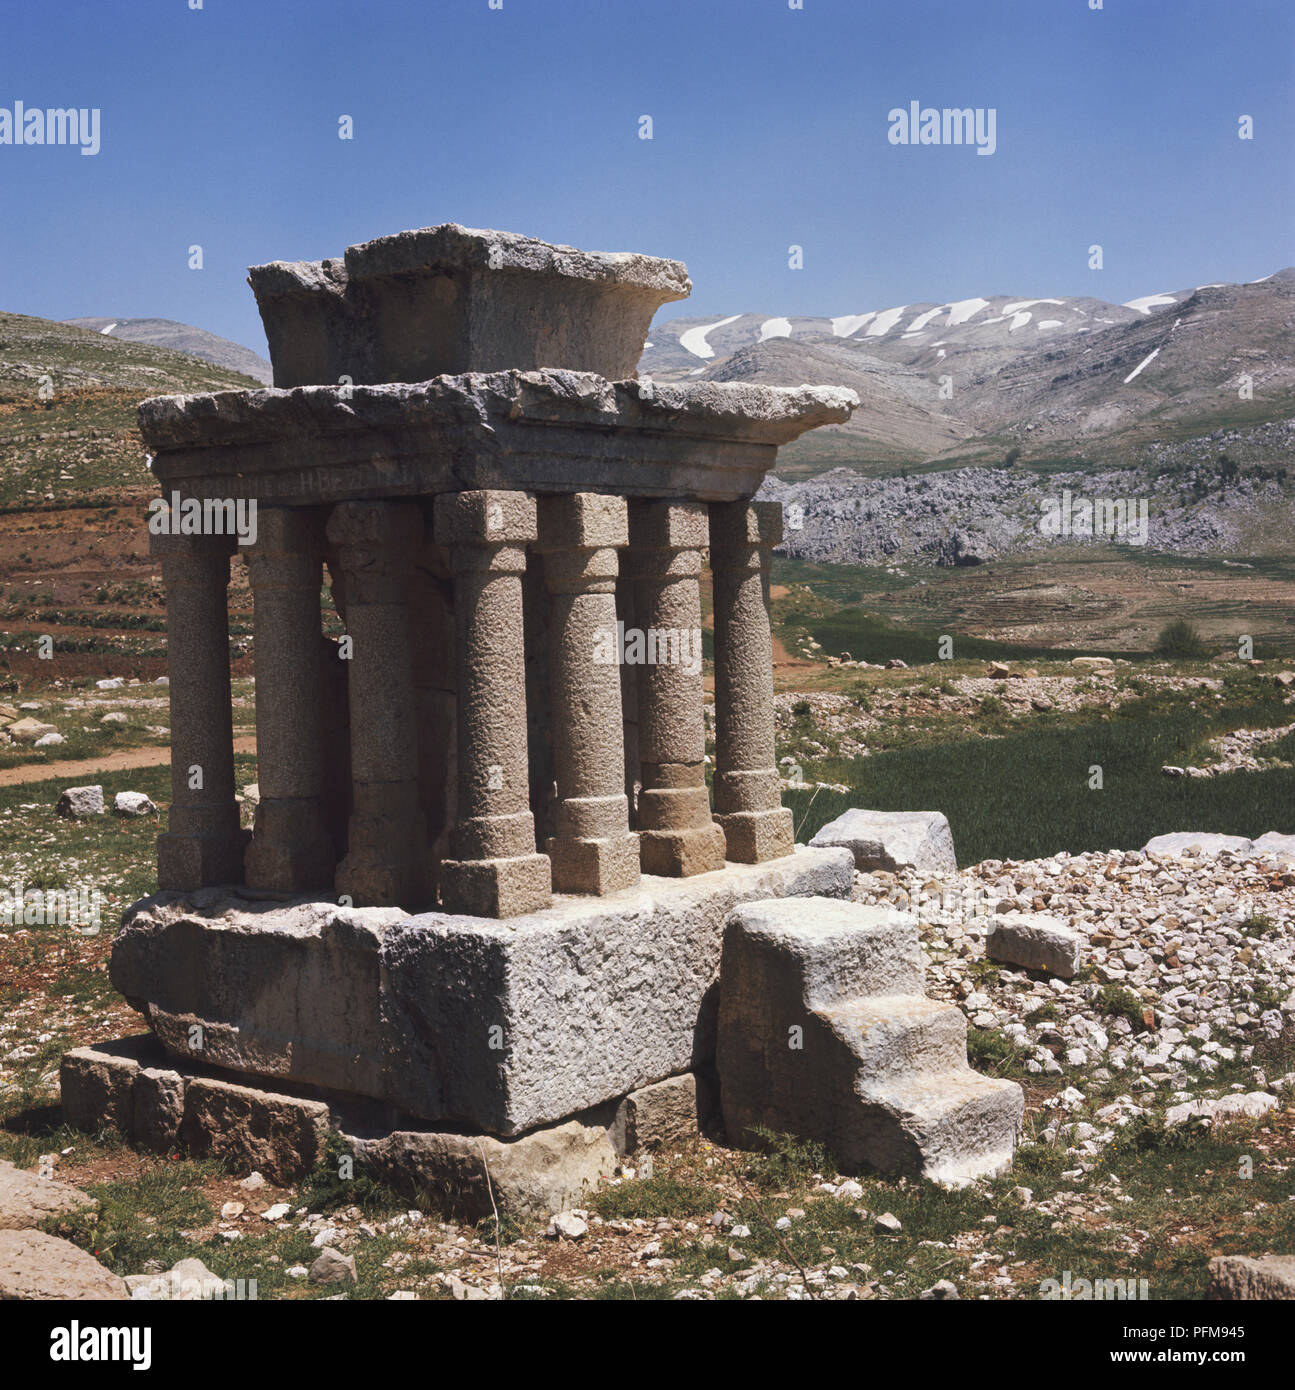 The Temple of Adonis altar with partially snow-covered mountains in the background, Fakra, Lebanon. Stock Photo